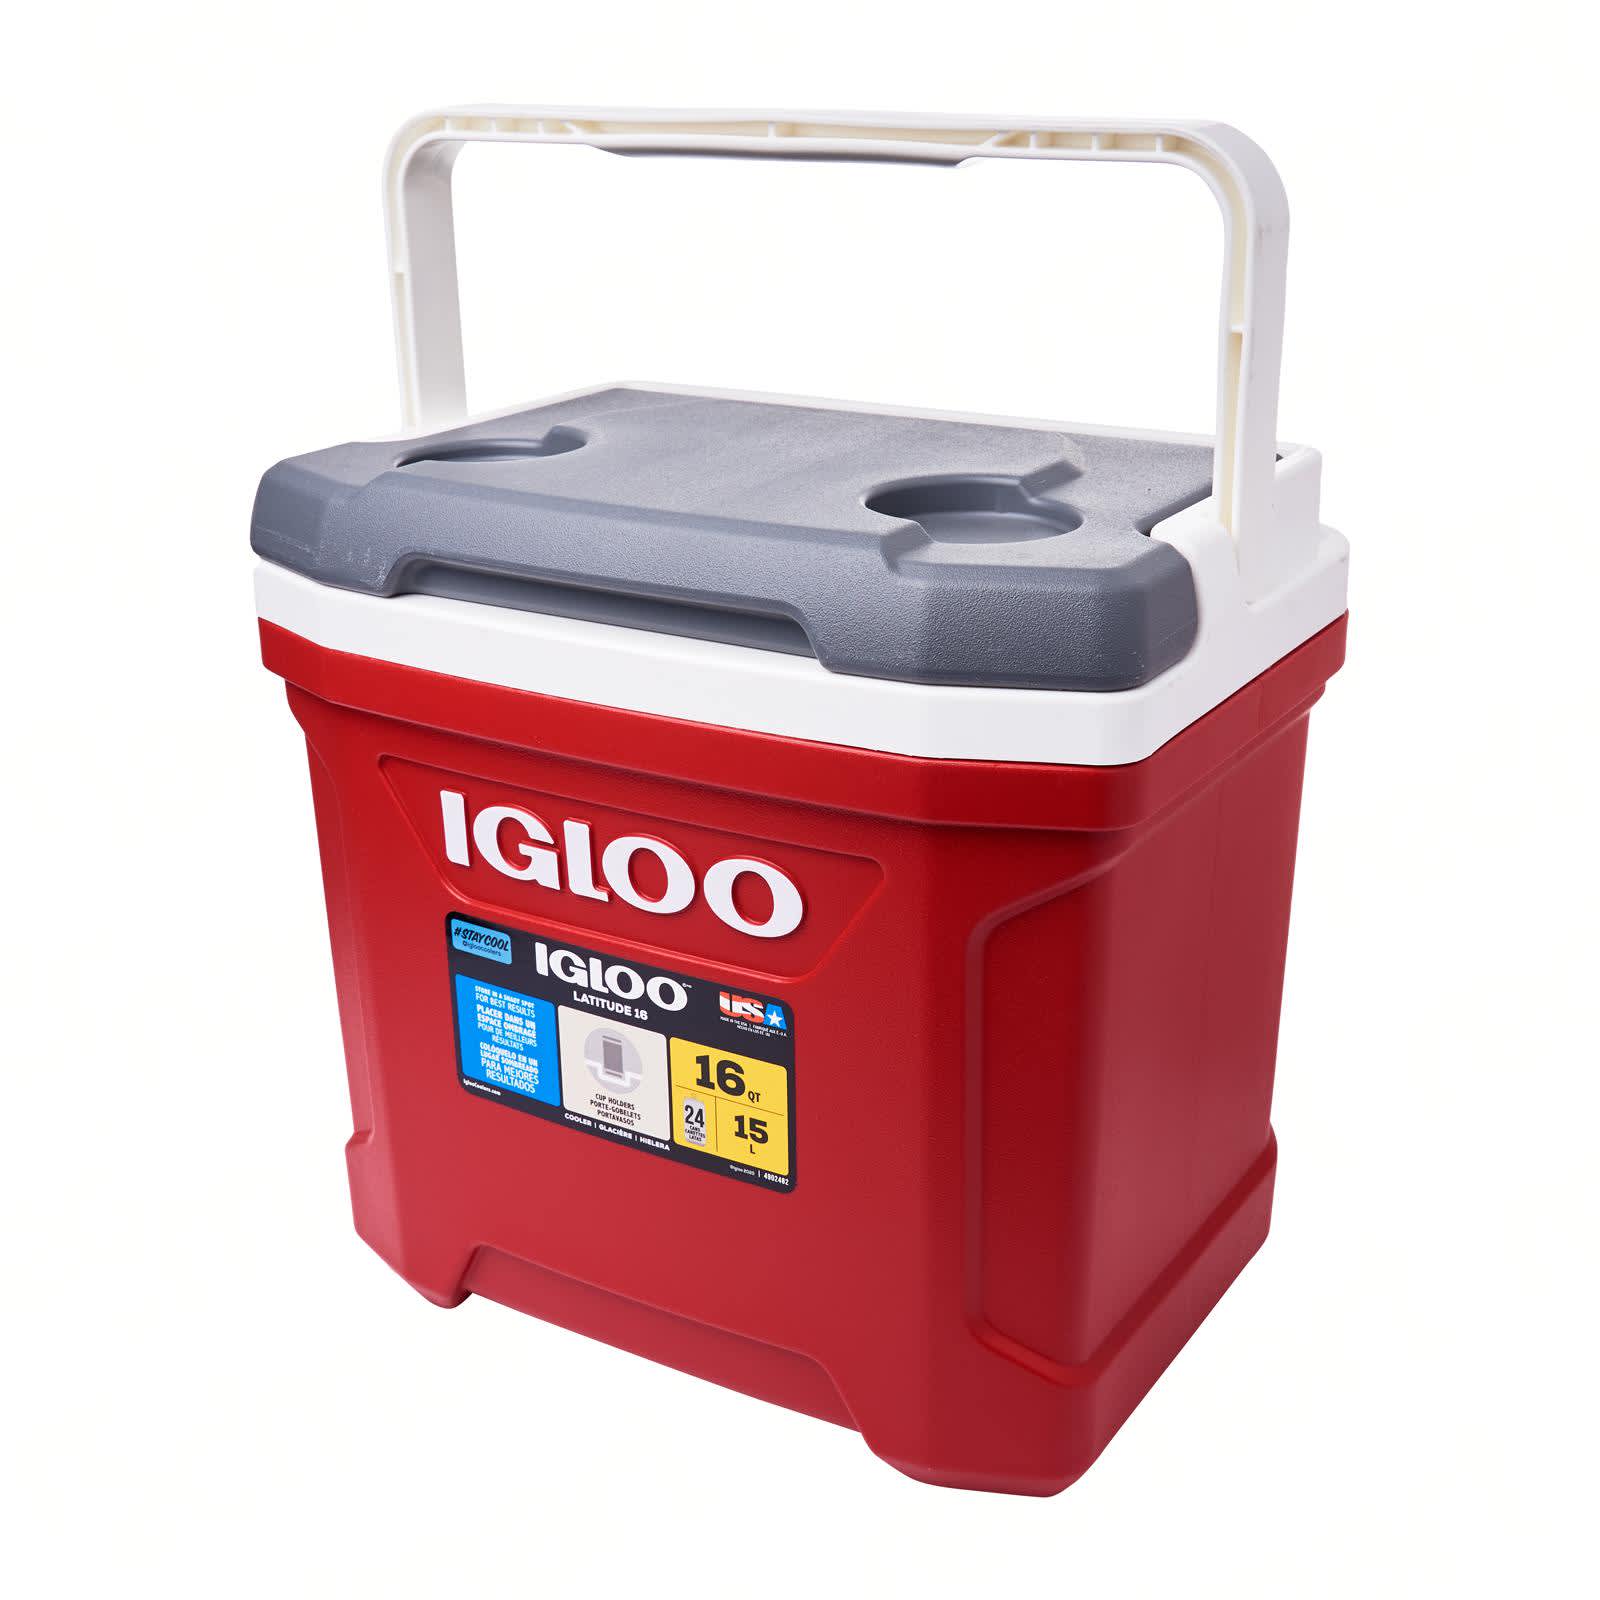 Latitude Industrial Red 16 qt. Chest Cooler